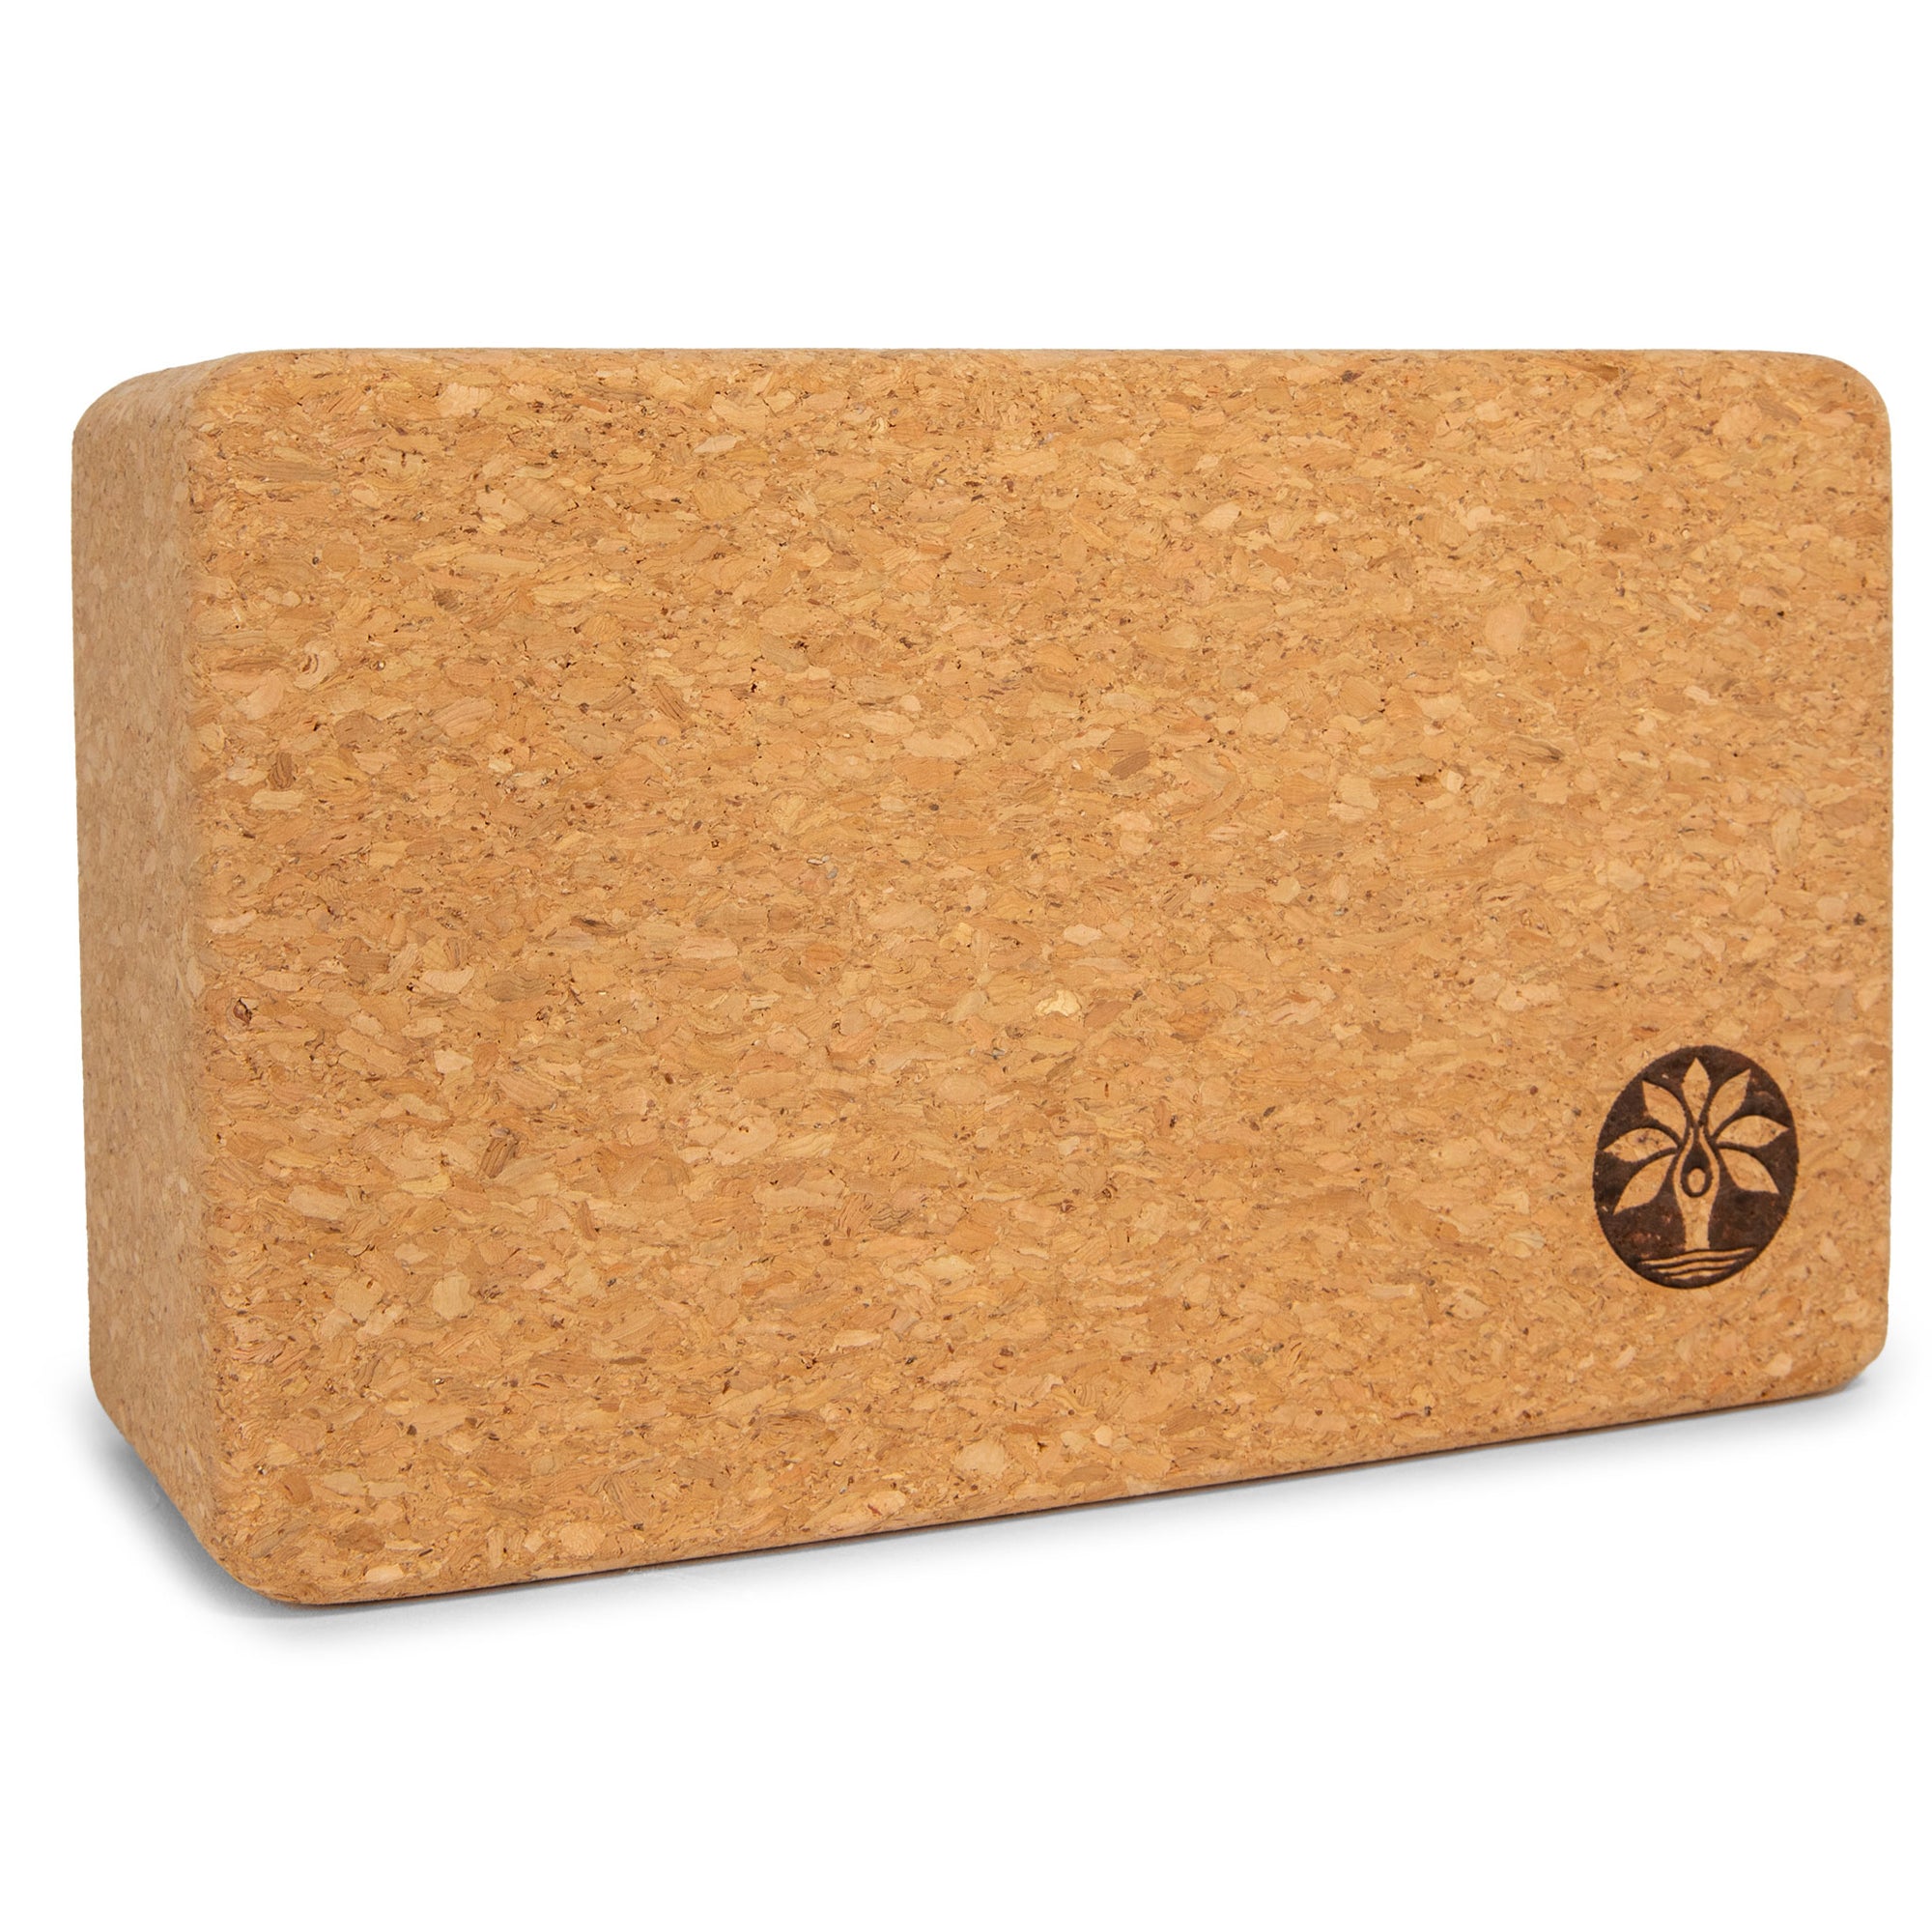 Hugger Mugger Cork Yoga Block - Naturally Grippy Texture, Durable, Made  from Renewable Cork, Rounded Edges for Comfort, Great for Sweaty Hands  BL-CORK